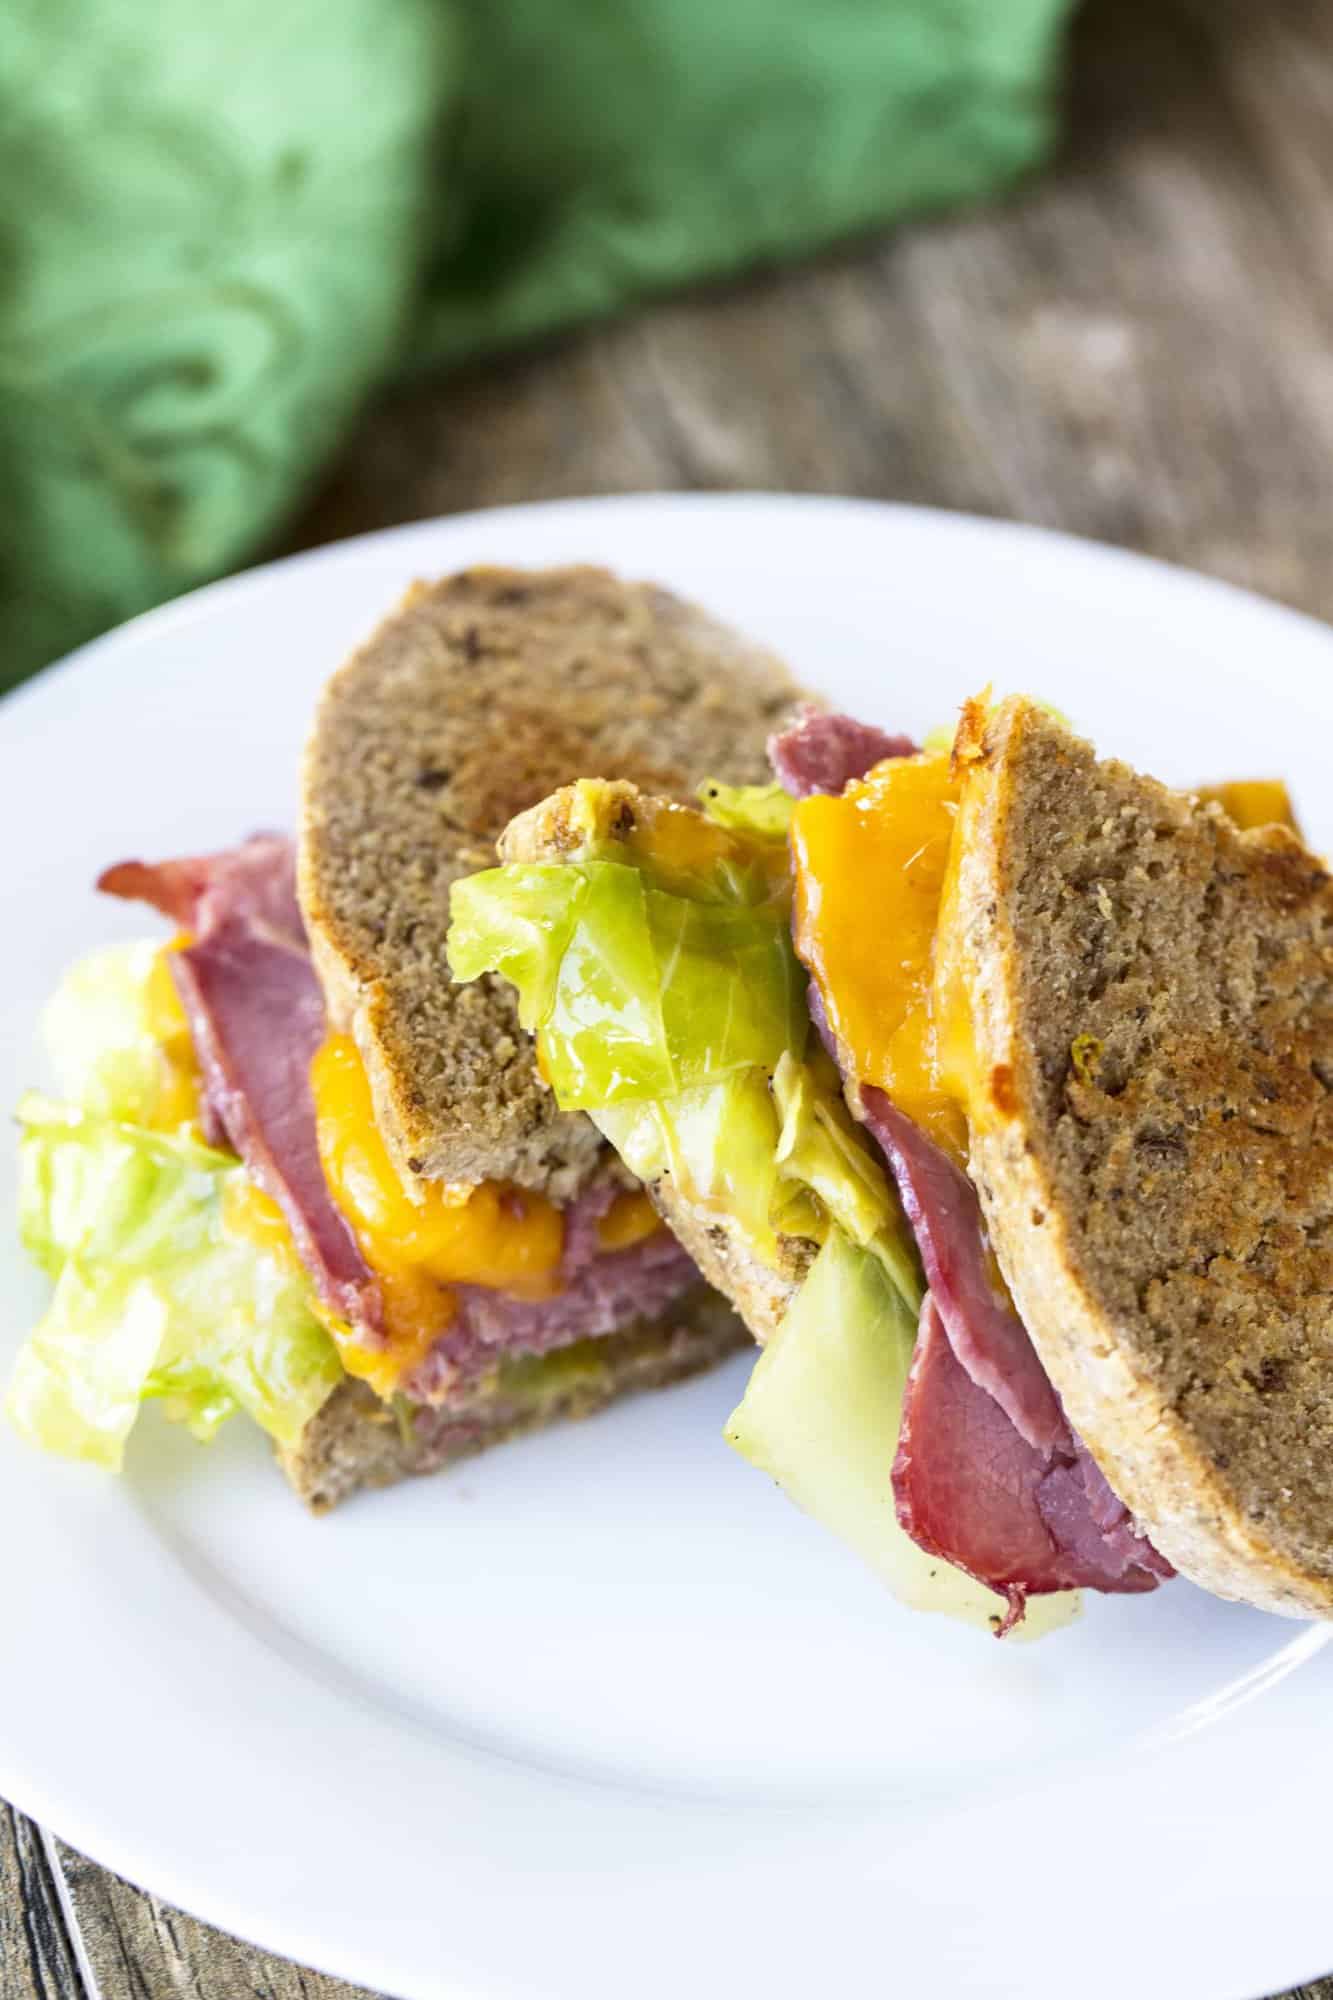 This Corned Beef and Cabbage Grilled Cheese Sandwich is the perfect way to use up St. Patrick's Day leftovers. Or better yet, use it as a simple way to celebrate with this favorite Irish-American holiday tradition!